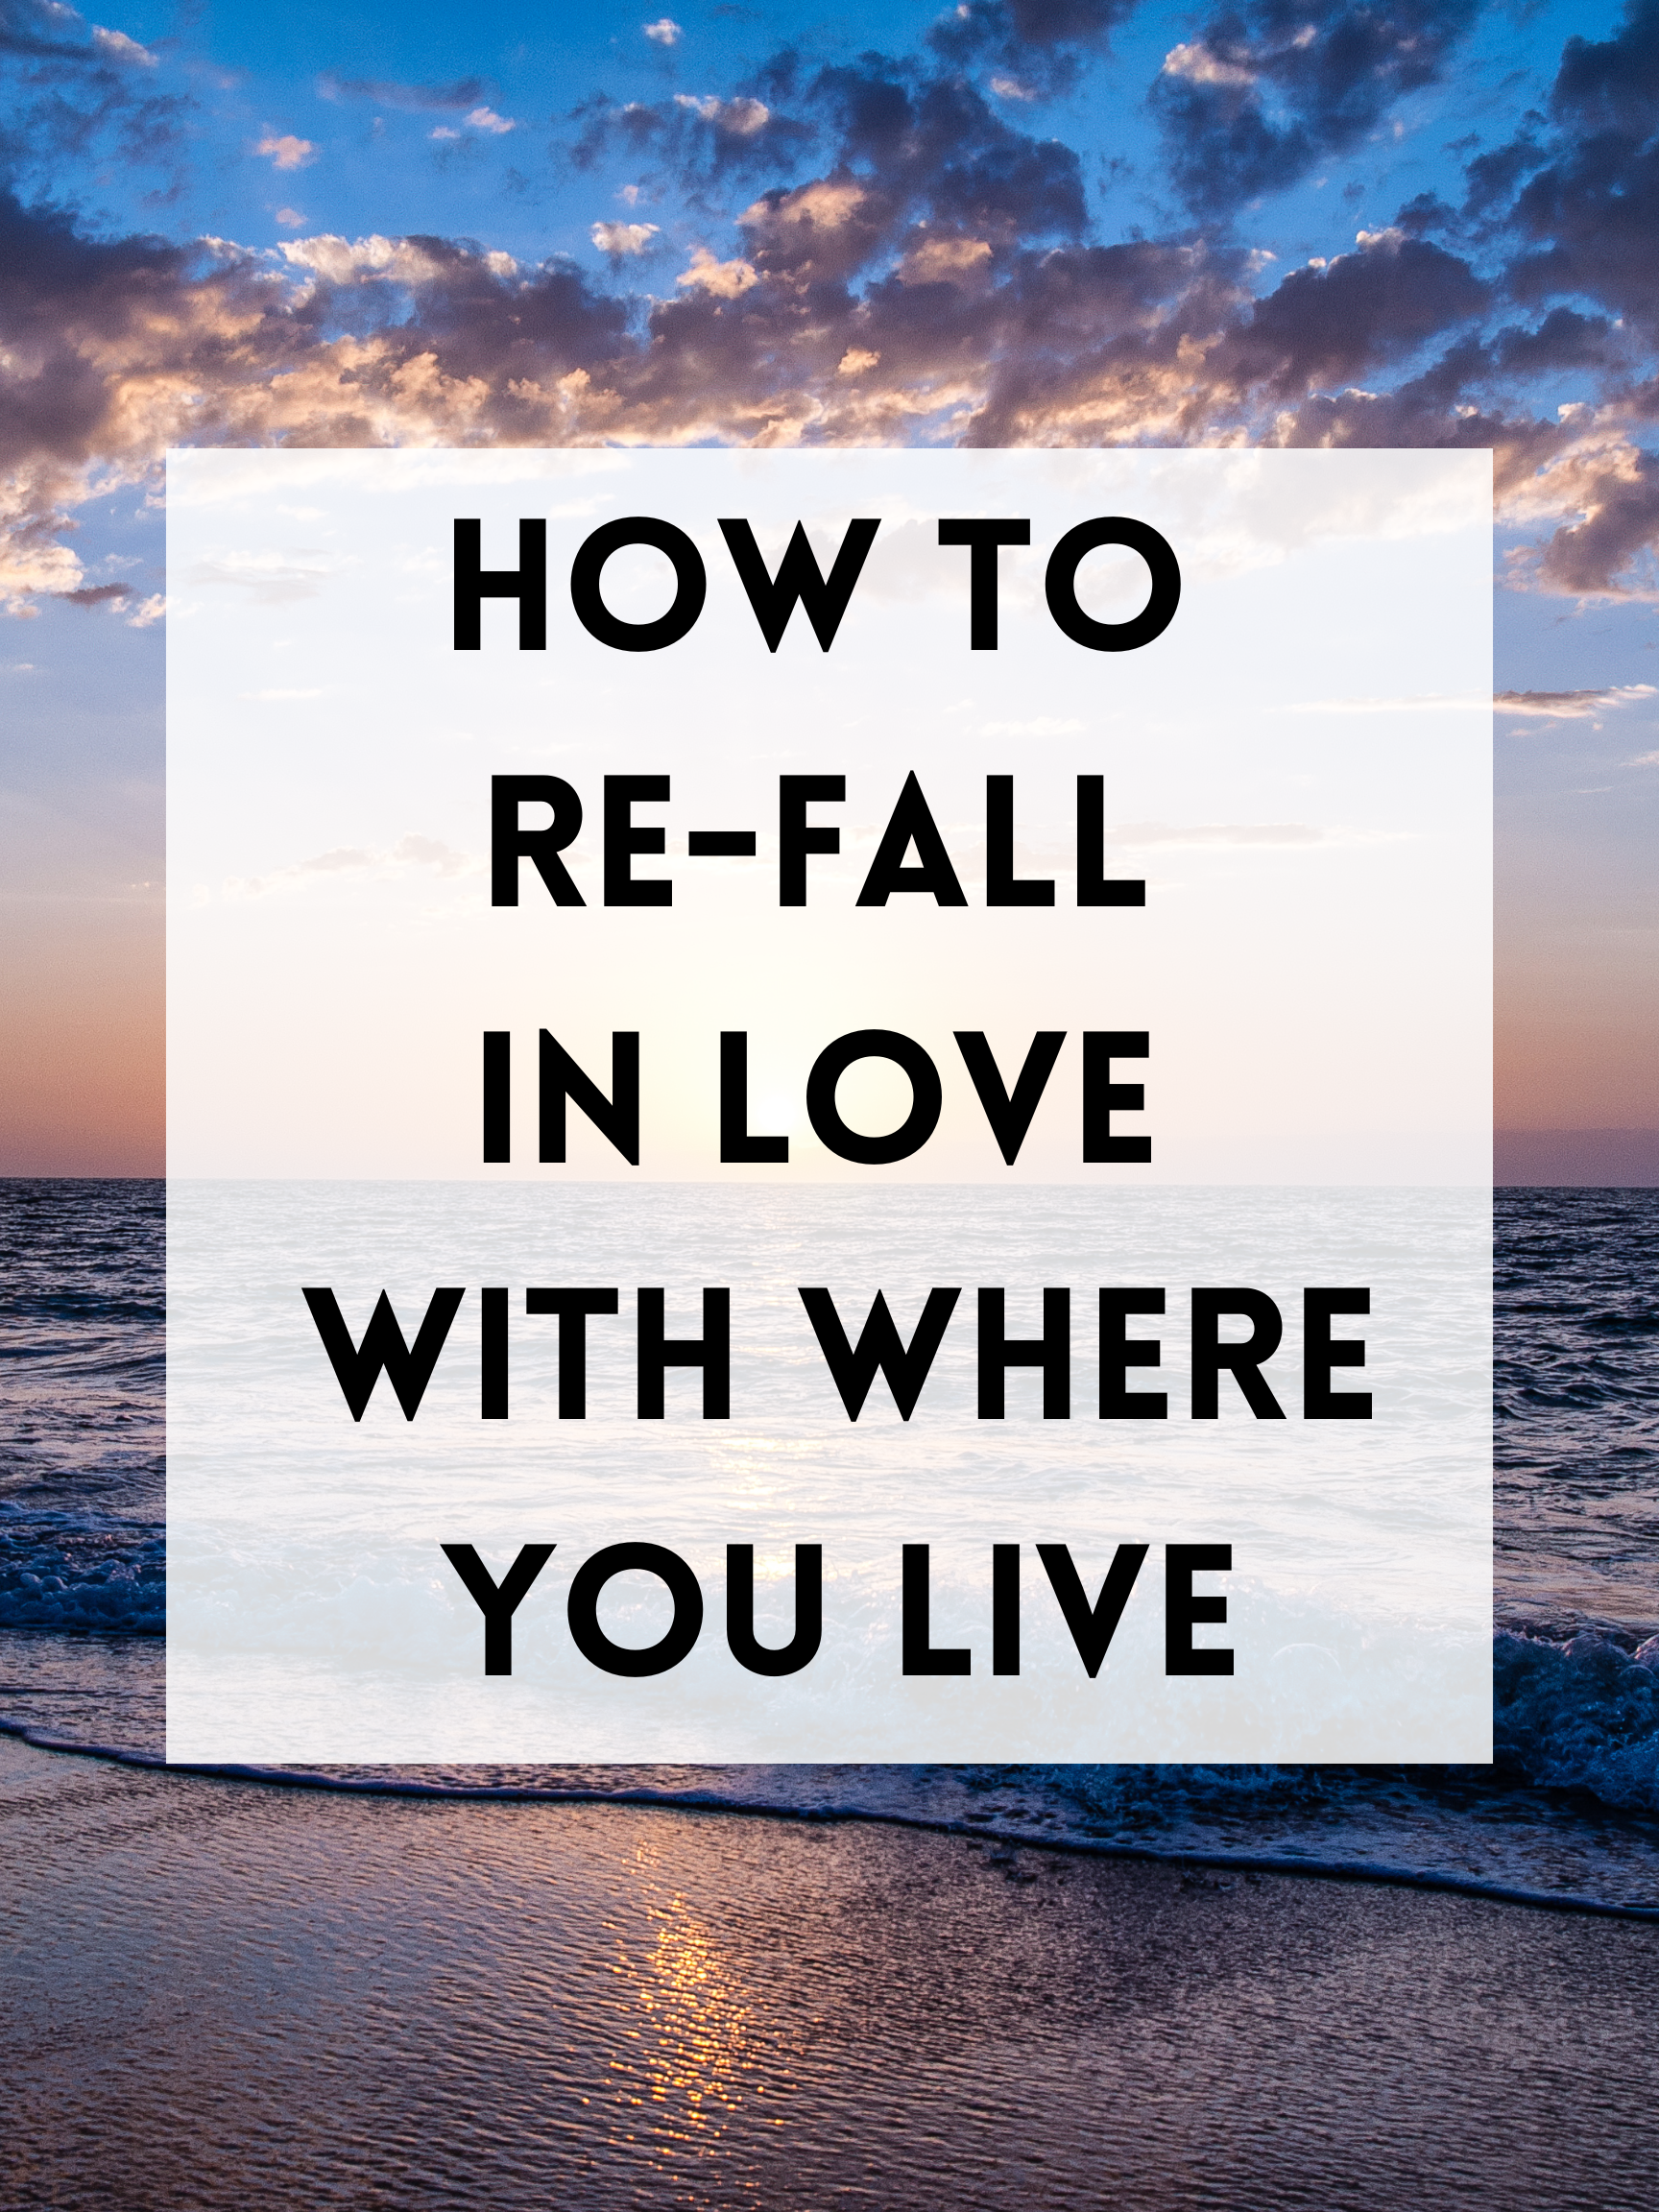 How to Re-Fall in Love with Where You Live